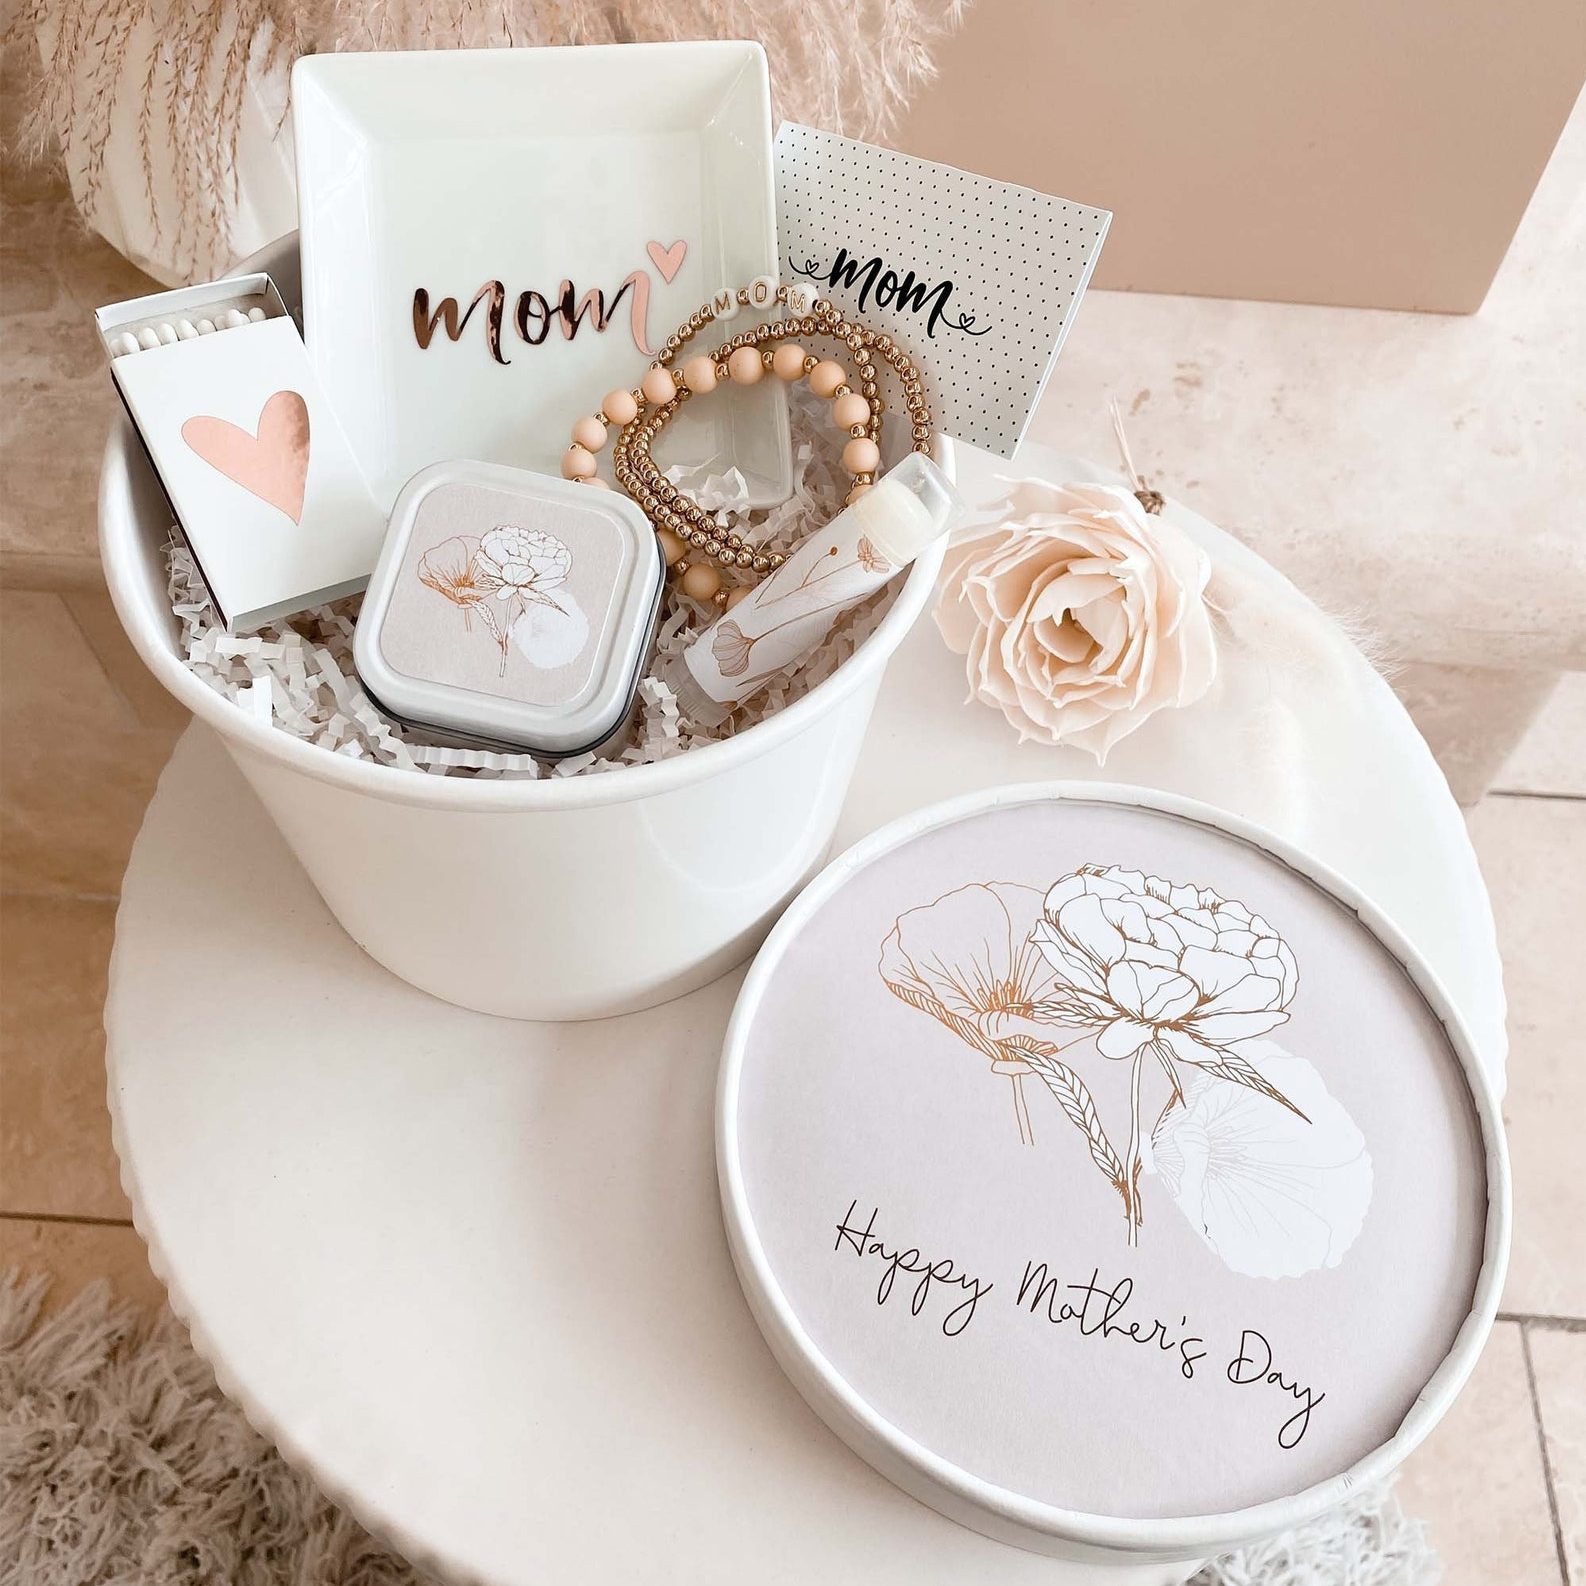 Discover more than 268 gift basket ideas for mom latest